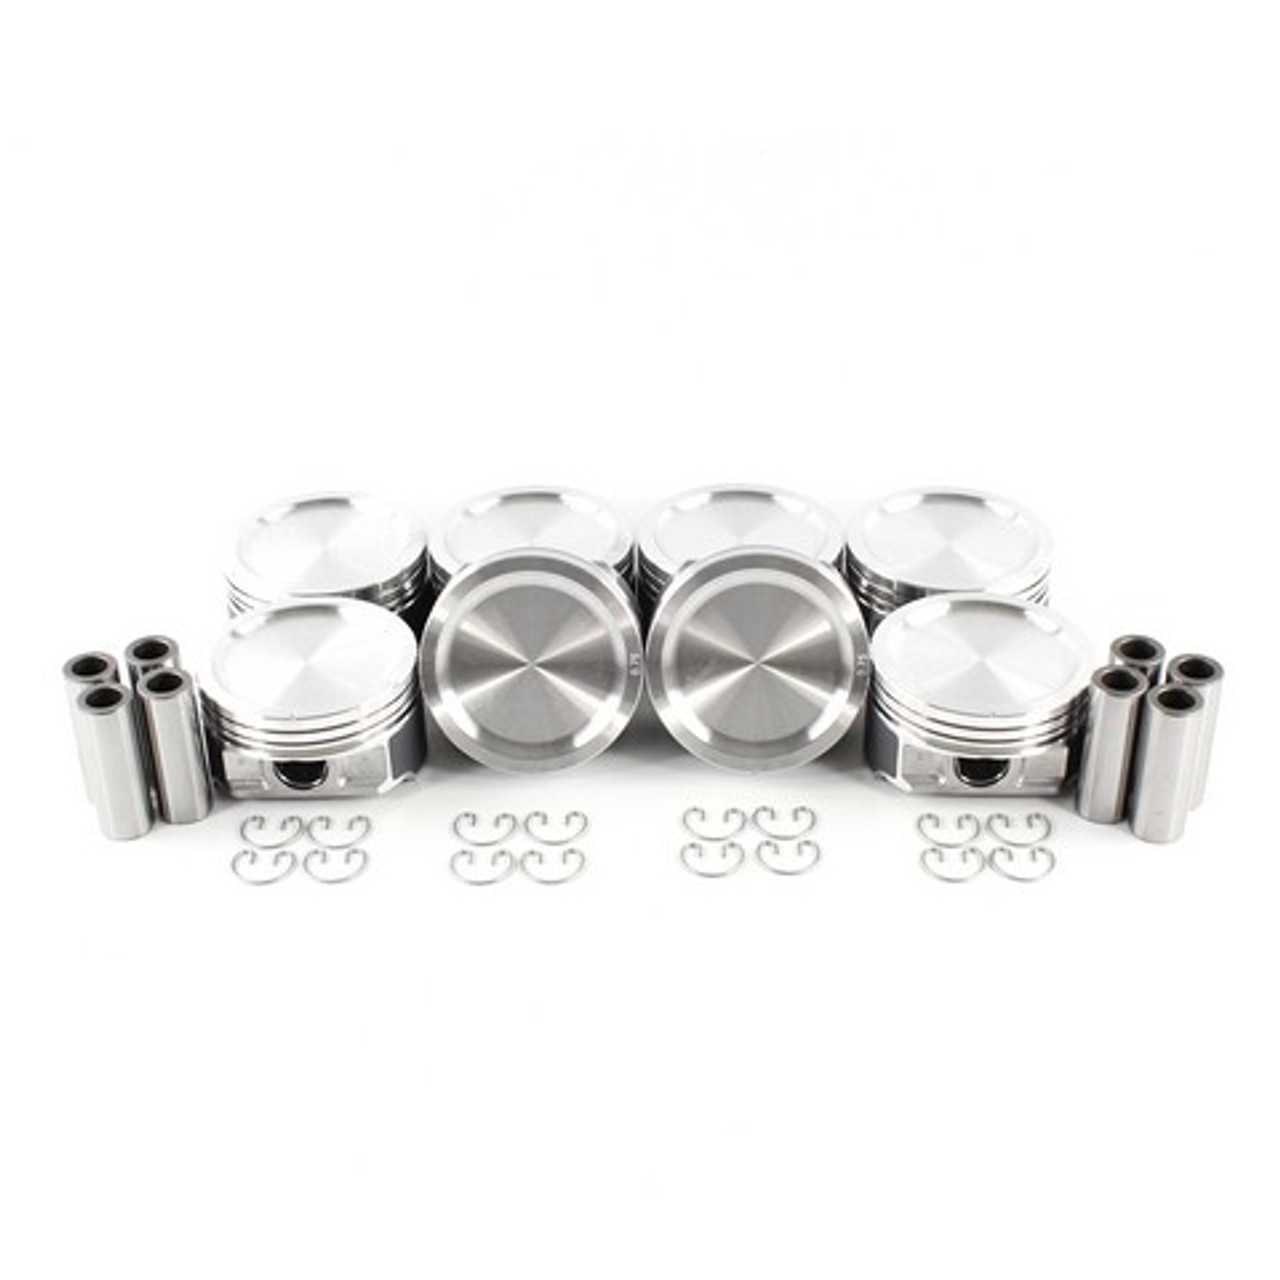 Piston Set 5.4L 2003 Ford Expedition - P4170.107